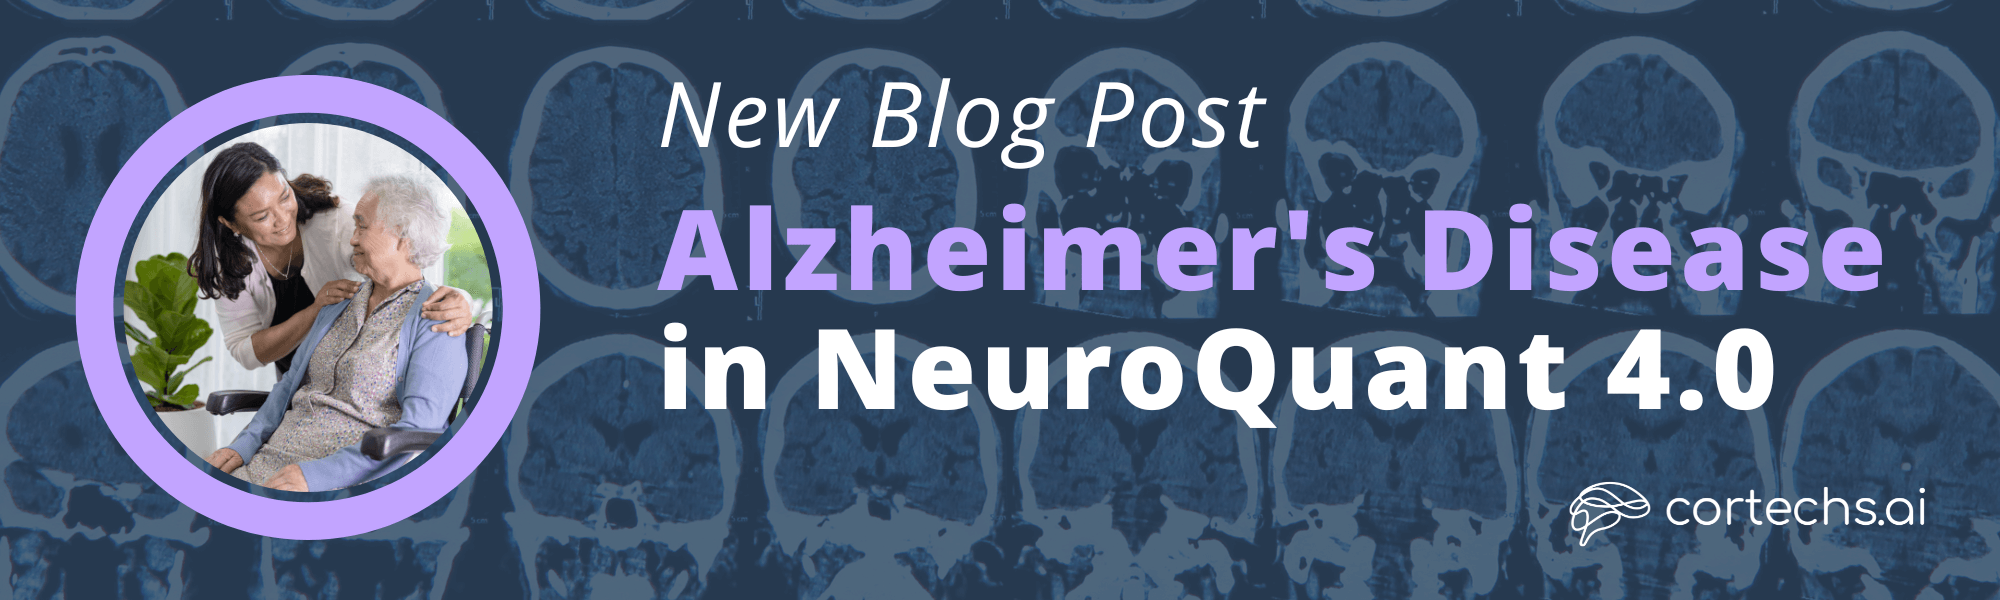 Identifying Alzheimer’s Disease With NeuroQuant 4.0